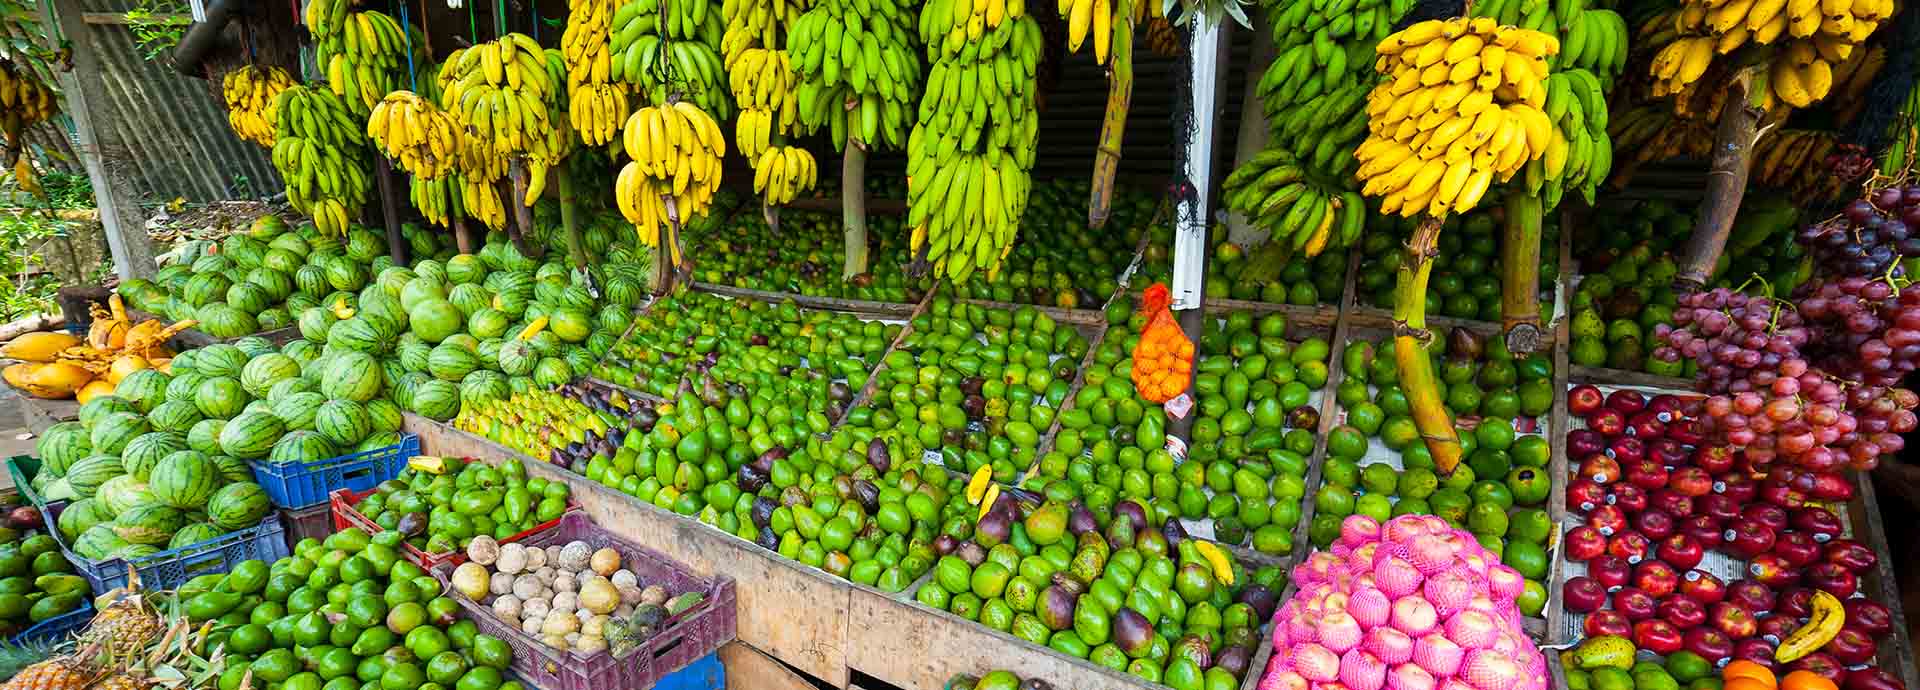 Sri Lanka abounds with tropical fruit and vegetables